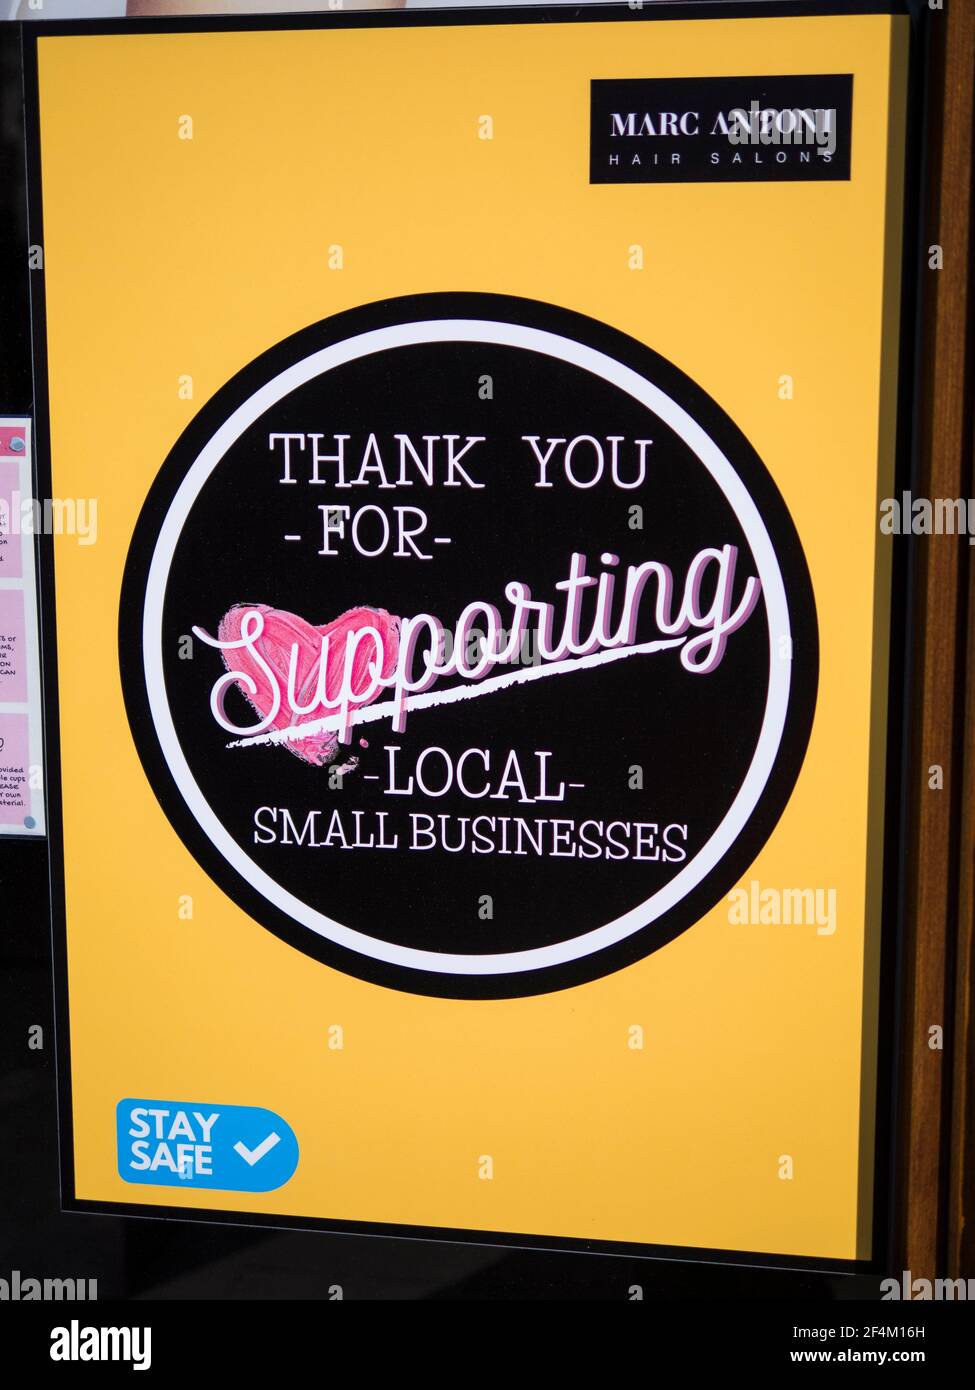 Thank You For Supporting Local Small Businesses, Stay Safe, Marc Antoni, Hair Salon, Henley-on-Thames, Oxfordshire, England, UK, GB. Stock Photo